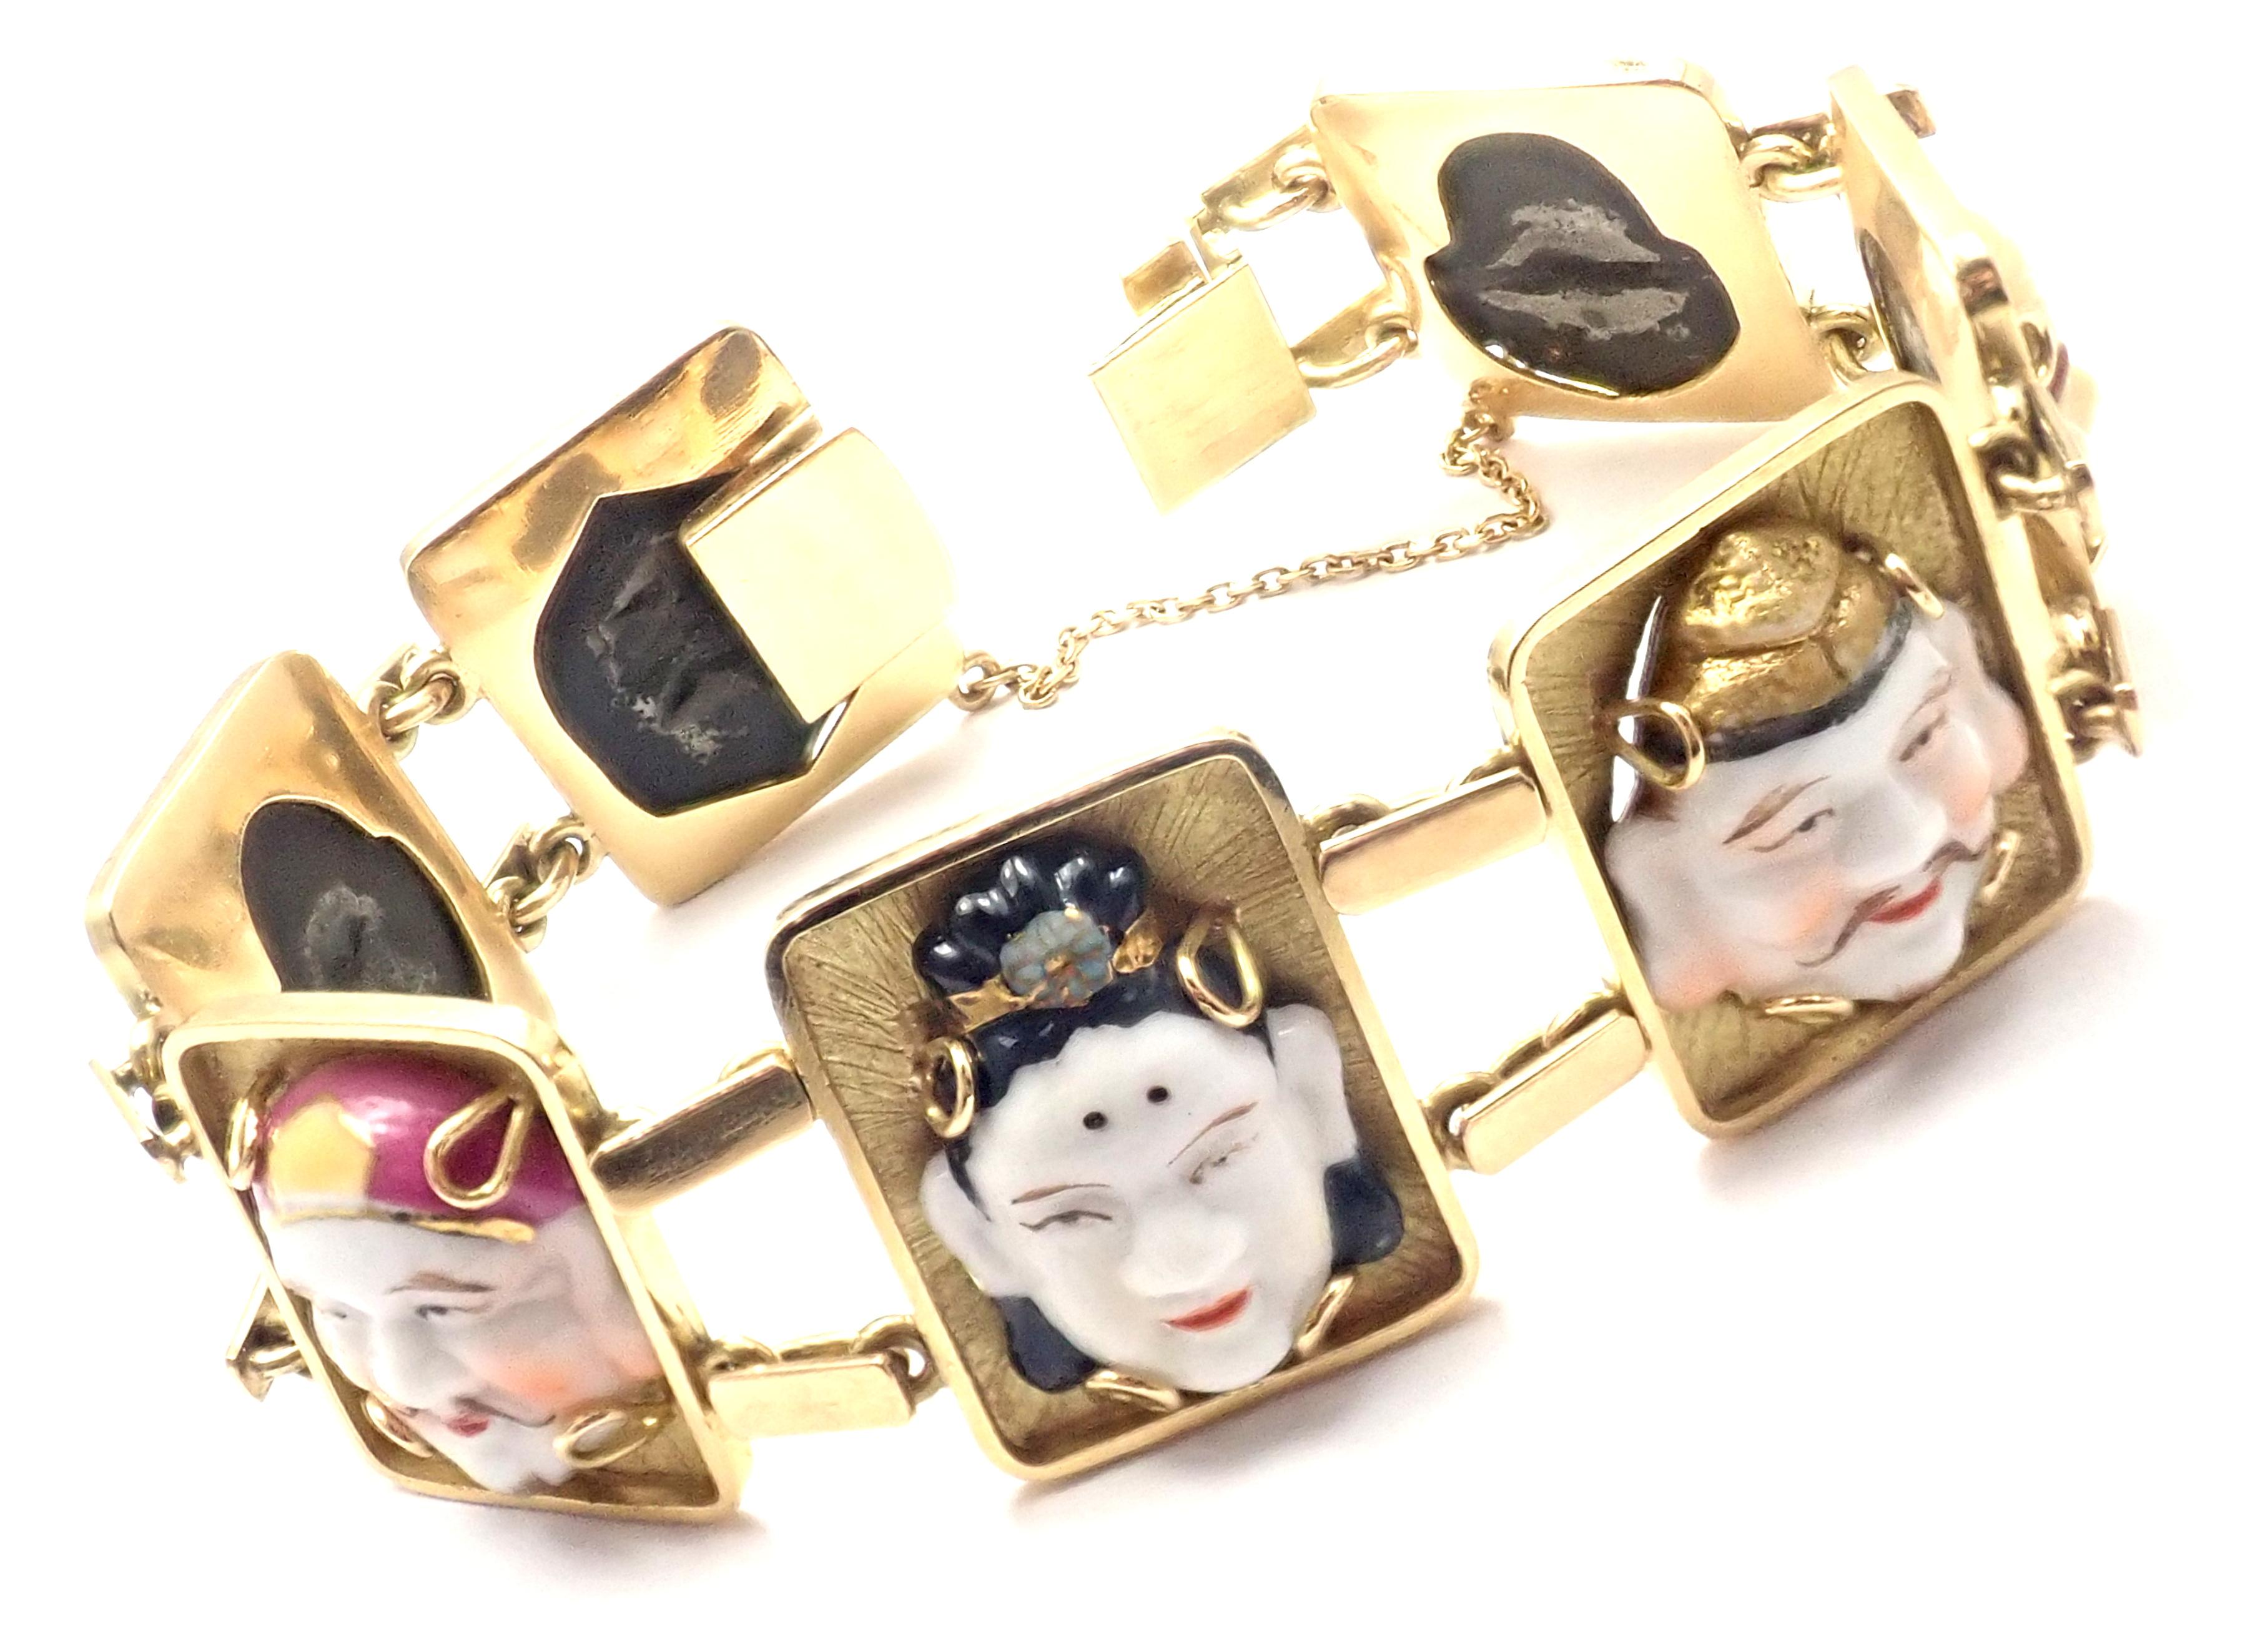 18k Yellow Gold Estate Vintage Japanese Toshikane Link Bracelet Featuring 7 Lucky Gods.
With The seven gods of fortune, or seven immortals, represented here are: Hotei, God of abundance. Jurojin: God of long life. Fukurokuju: God of happiness,